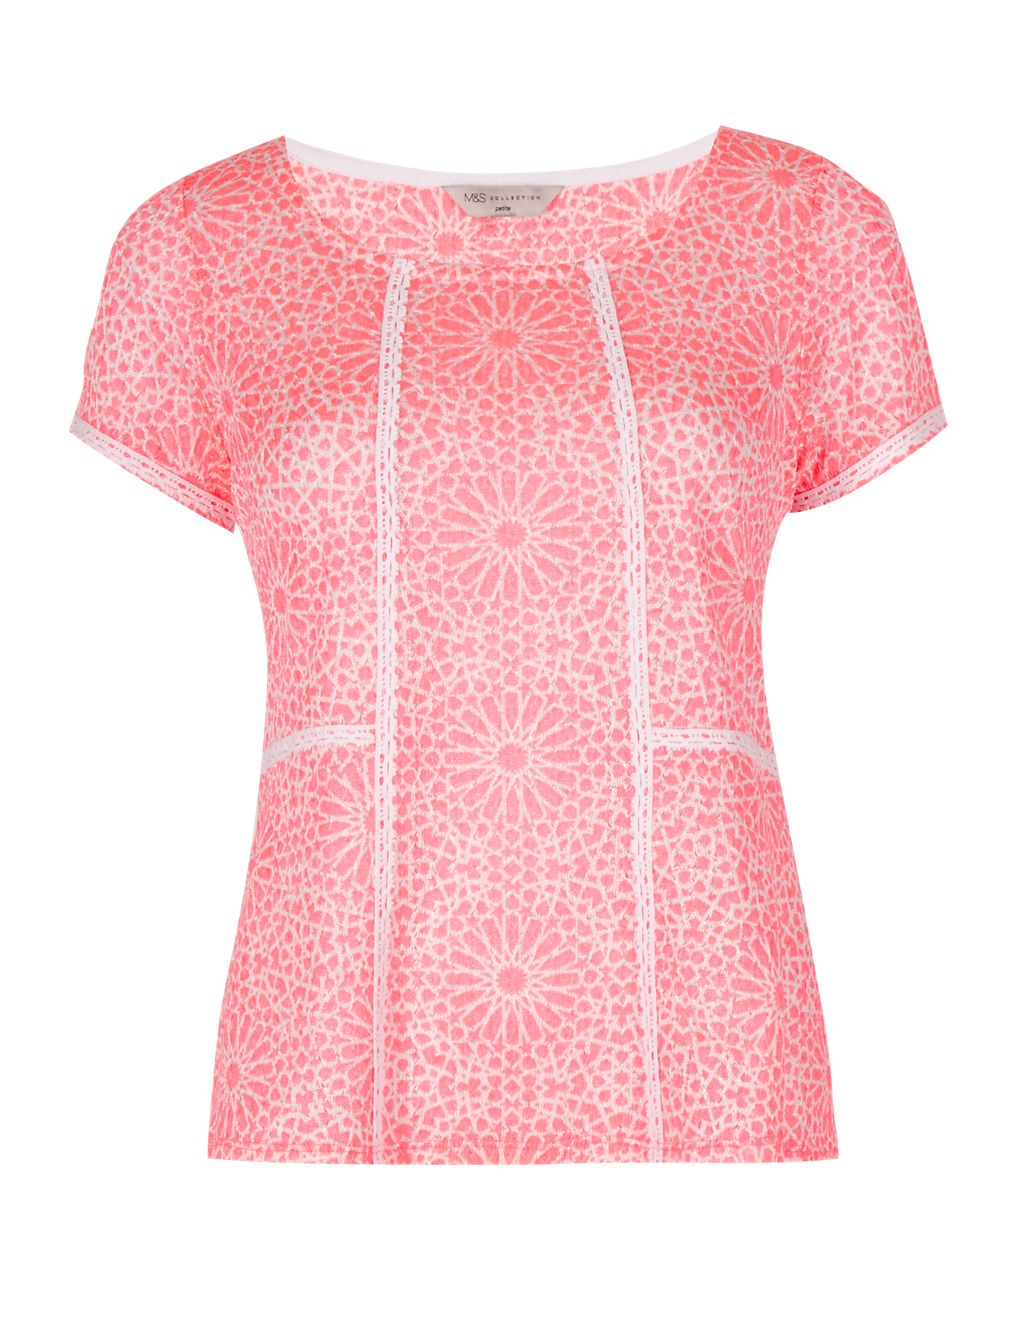 PETITE Floral Lace Panelled T-Shirt 1 of 4